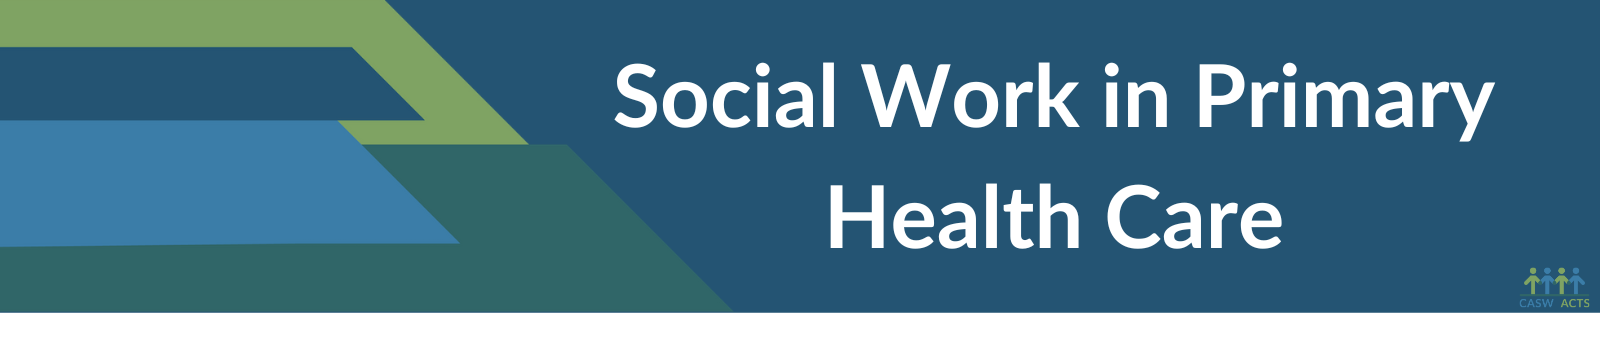 Social Work in Primary Health Care | Canadian Association of Social Workers